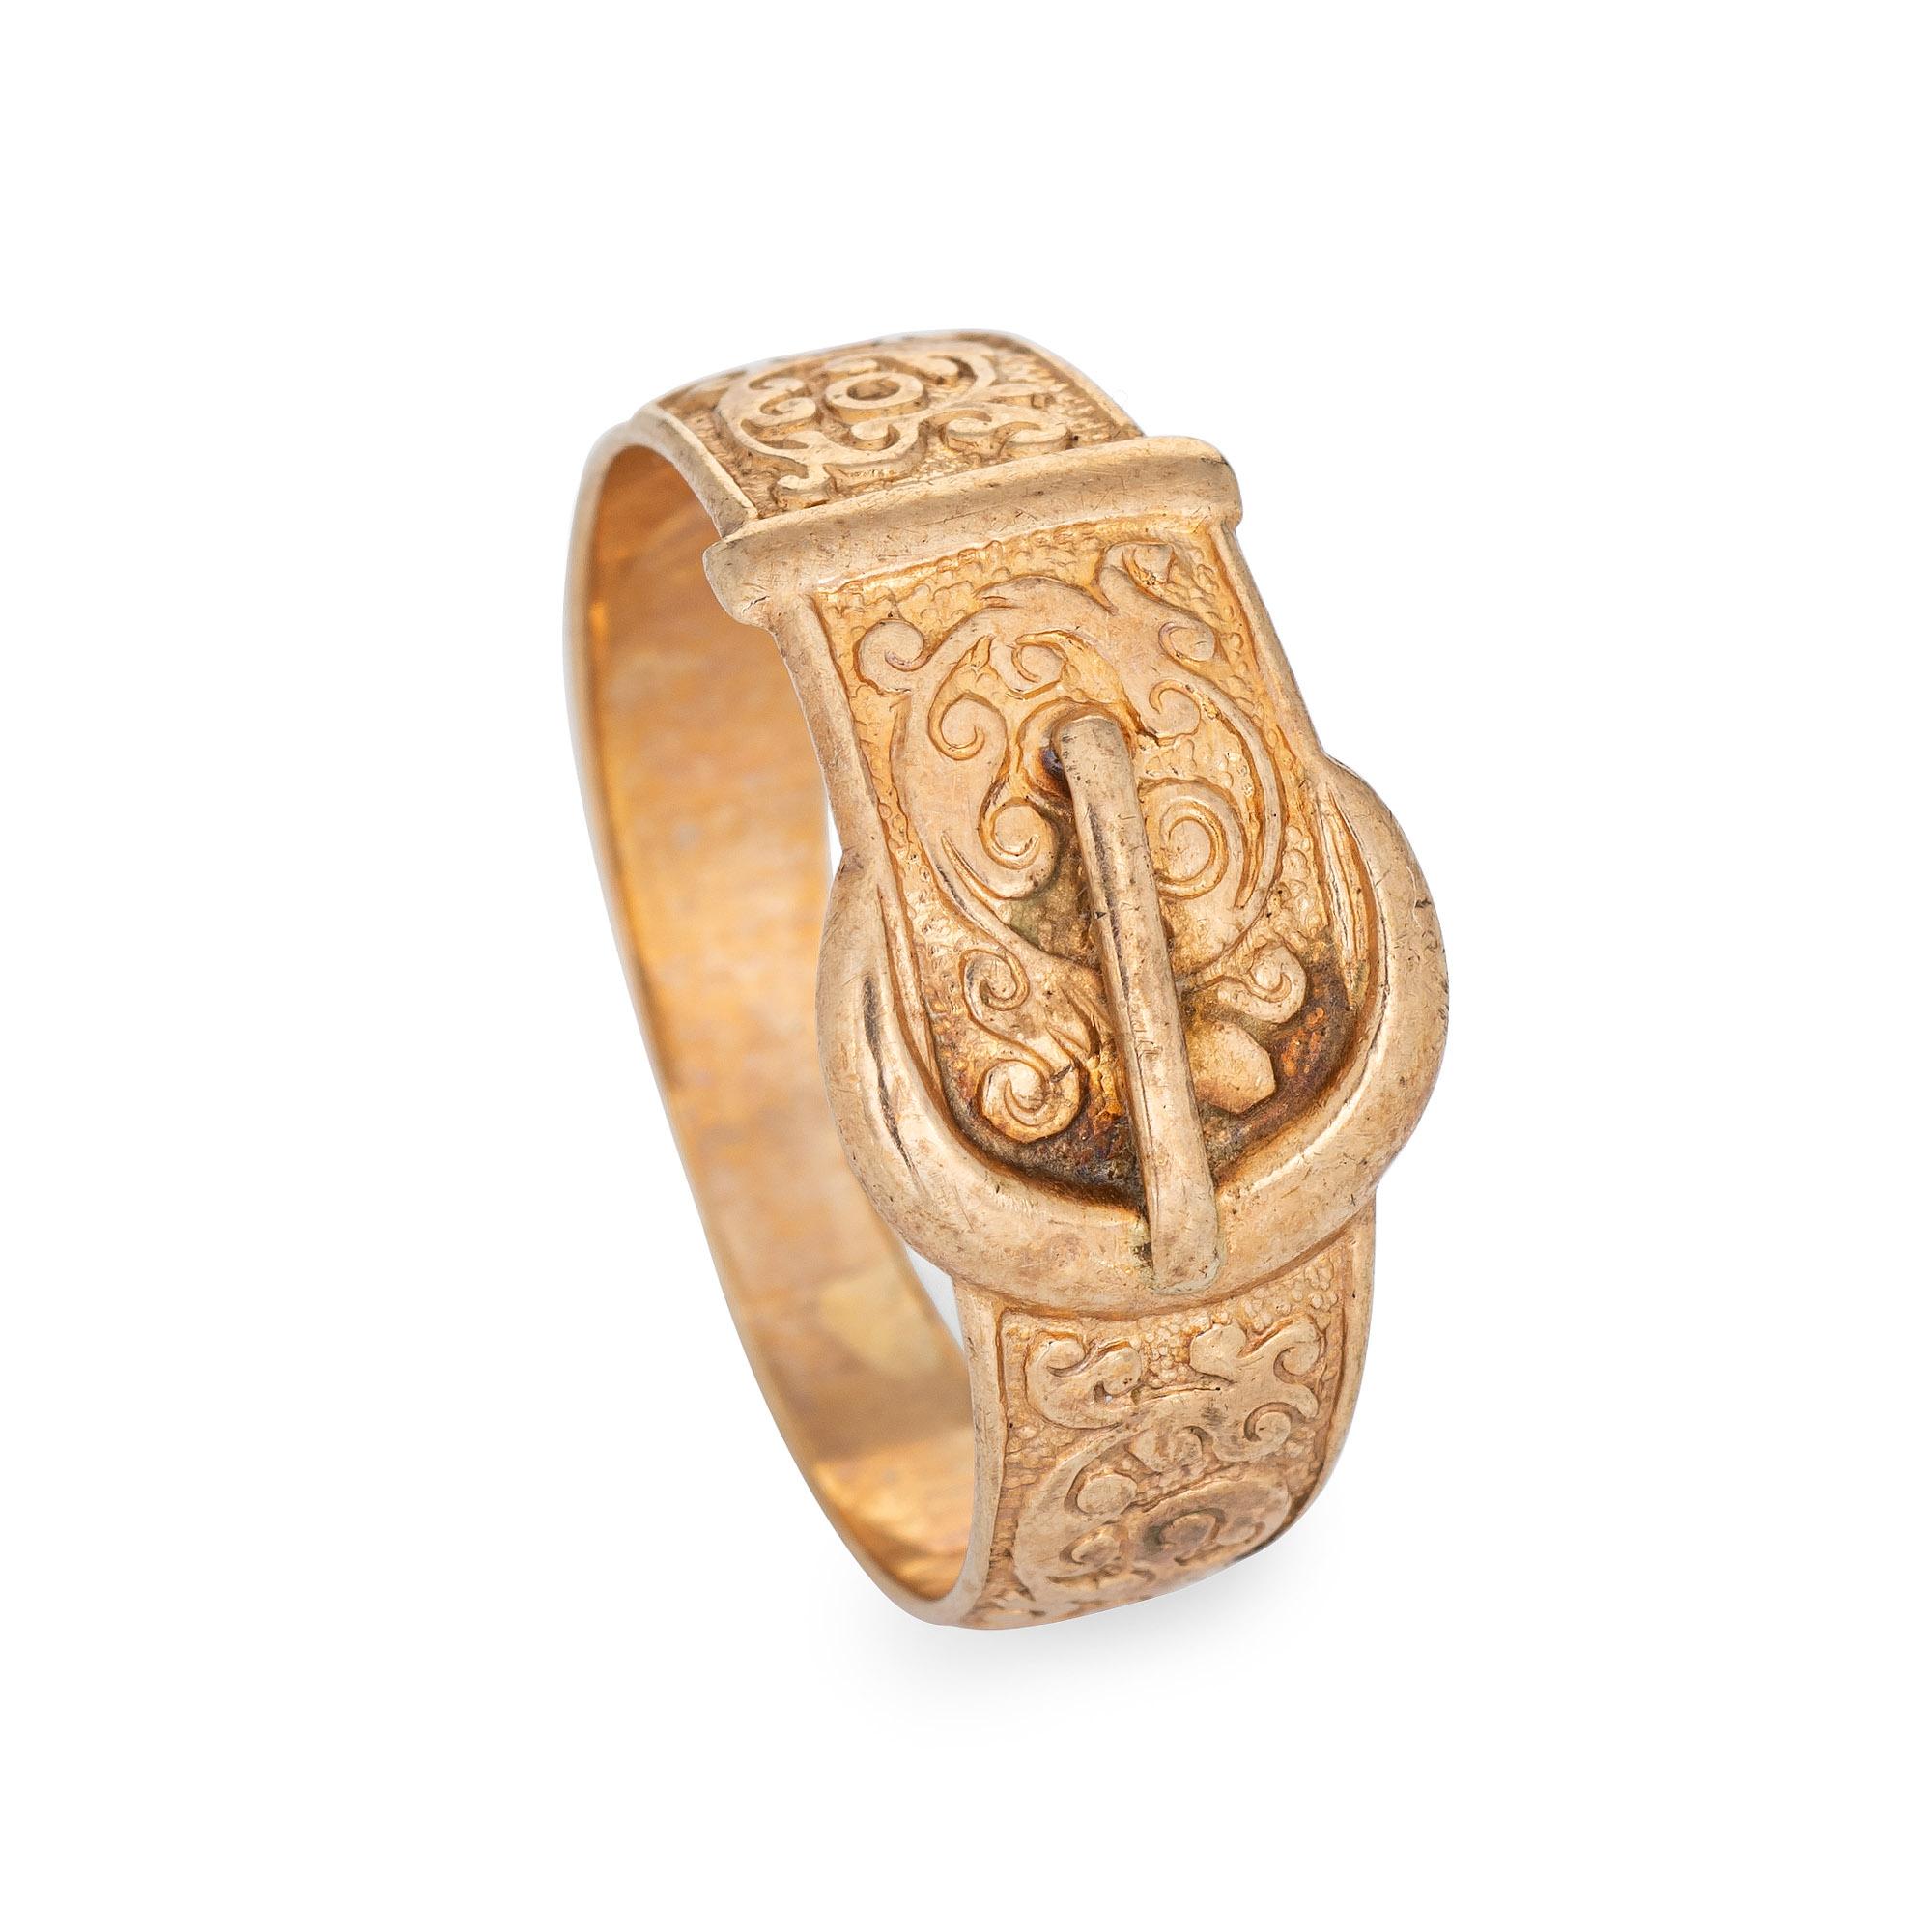 Stylish vintage buckle ring crafted in 9 karat yellow gold. 

The stylish buckle ring features a charming scrolled design. Currently a size 10 1/2 (can be resized) the ring is great worn alone or stacked with your fine jewelry from any era. The